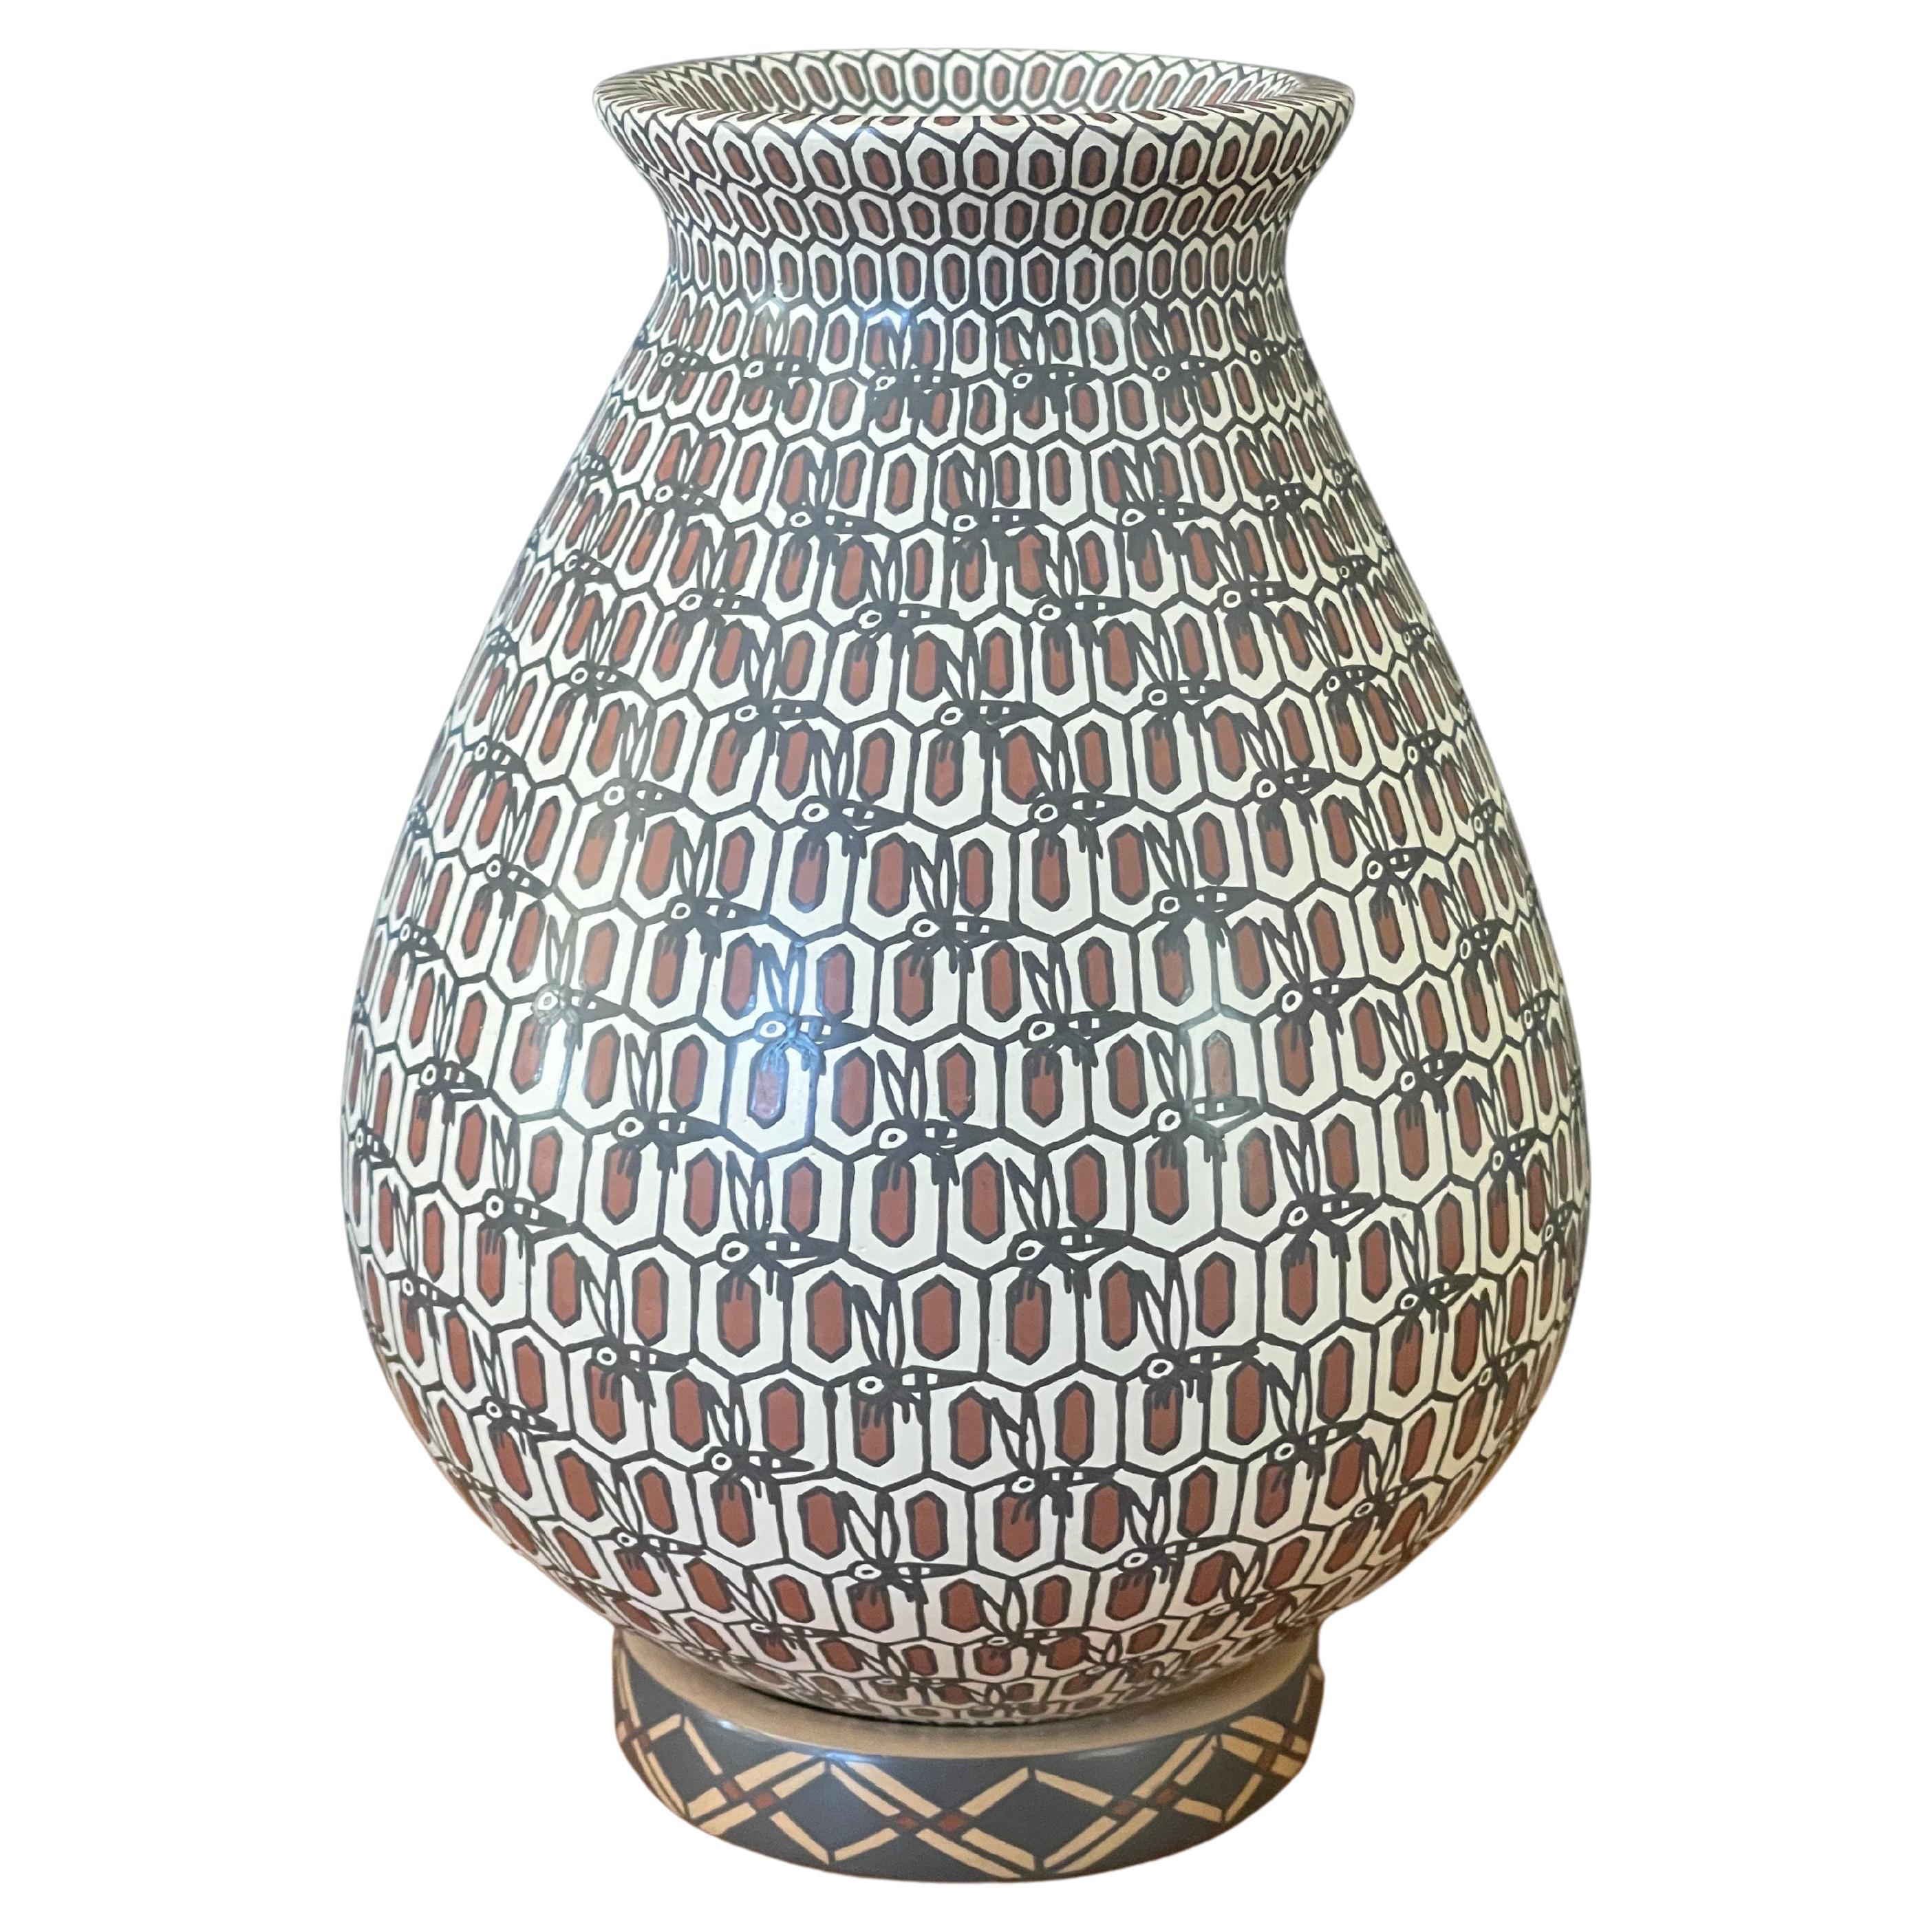 "Paquime Pottery" Jar / Olla with Honeycomb by Efren Ledezma for Mata Ortiz